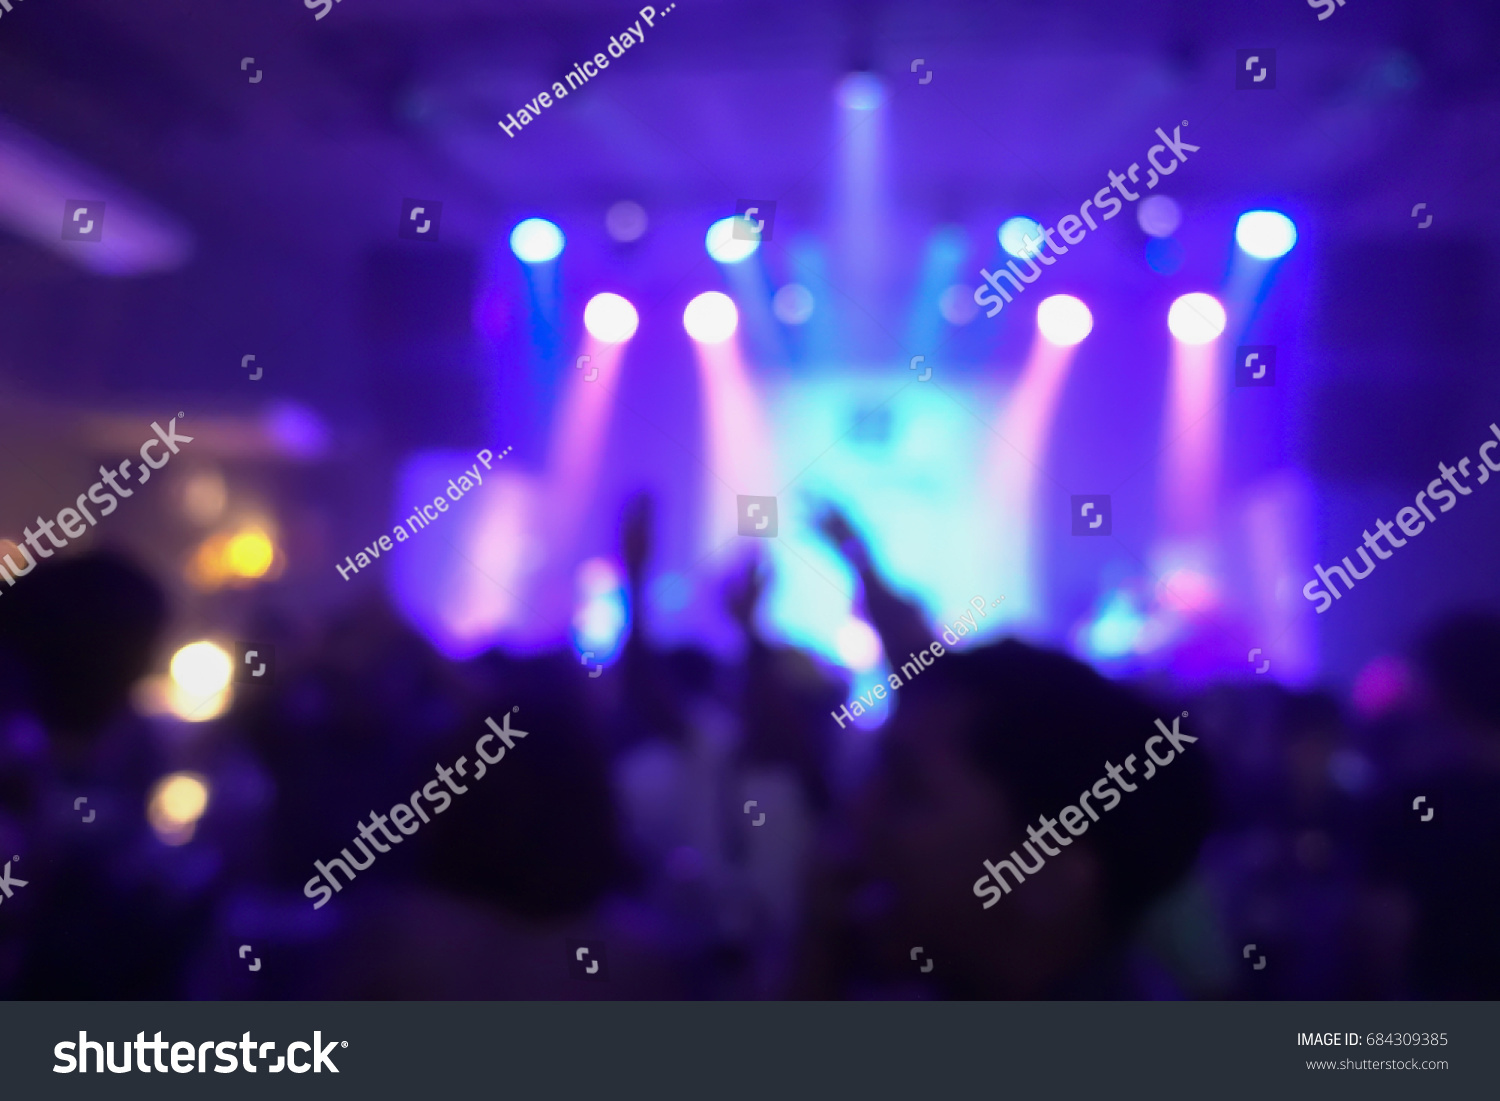 Blur background of concert crowd in front of bright stage lights musics #684309385